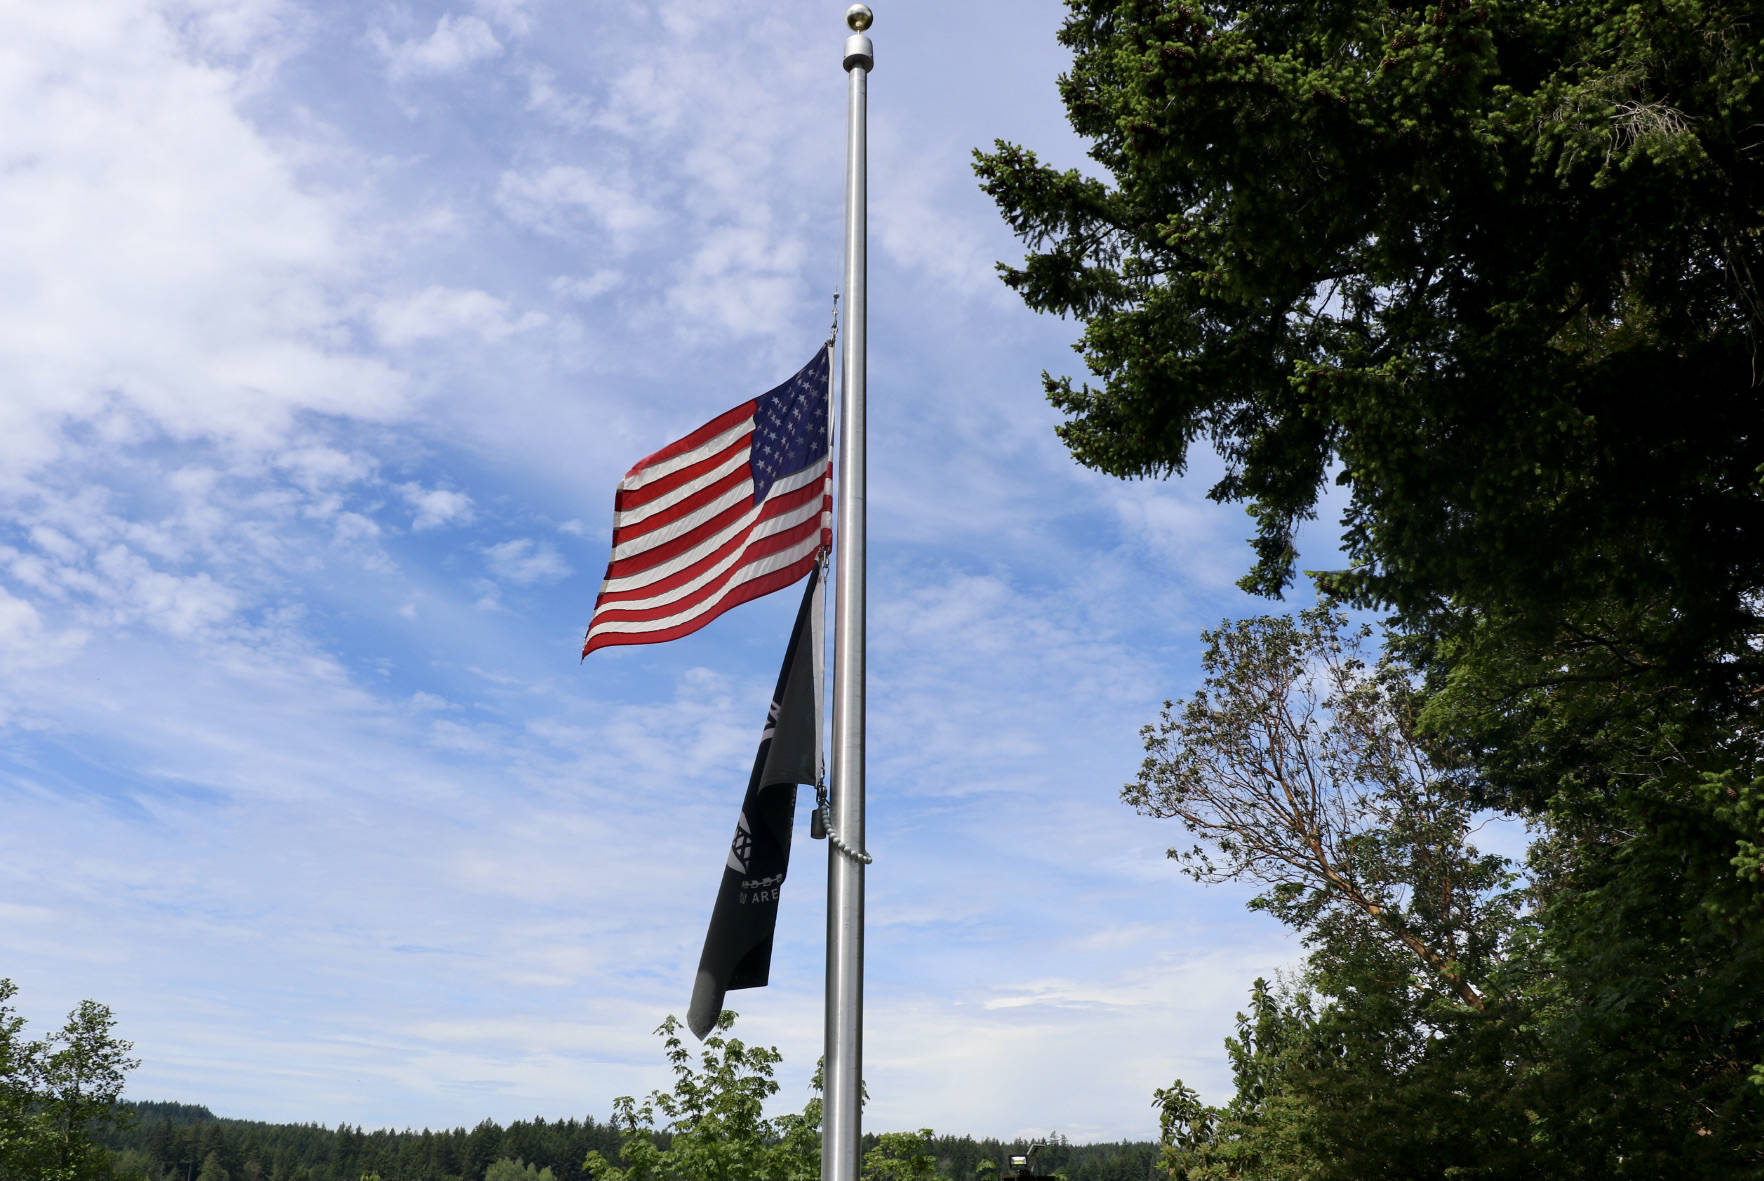 The flag was raised and lowered to half staff to recognize those who gave the ultimate sacrifice in service to our nation. Ken Park/North Kitsap Herald photos.